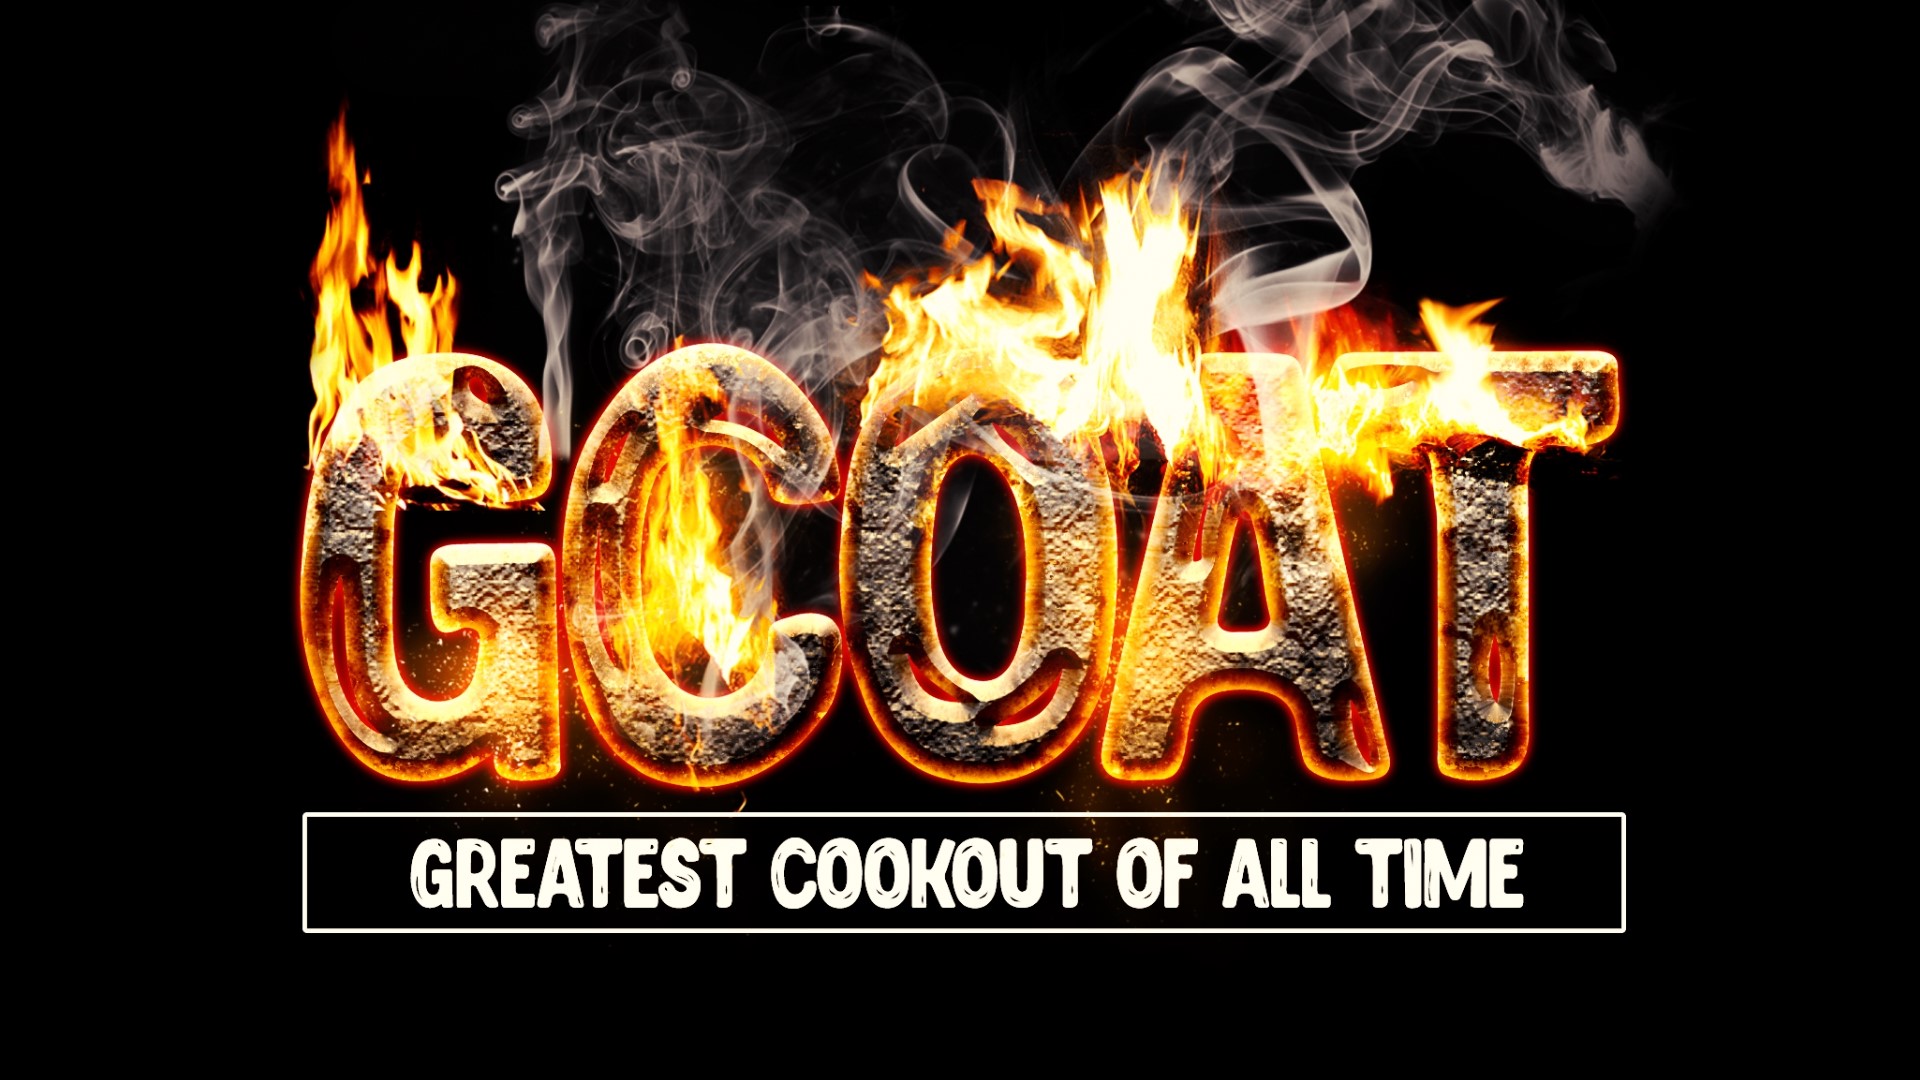 Sponsored by: Coast2Coast Boyz Events & Us Helping Us. The Greatest Cookout of All Time is coming to DC May 28th! For more info go to dc-gcoat.com.